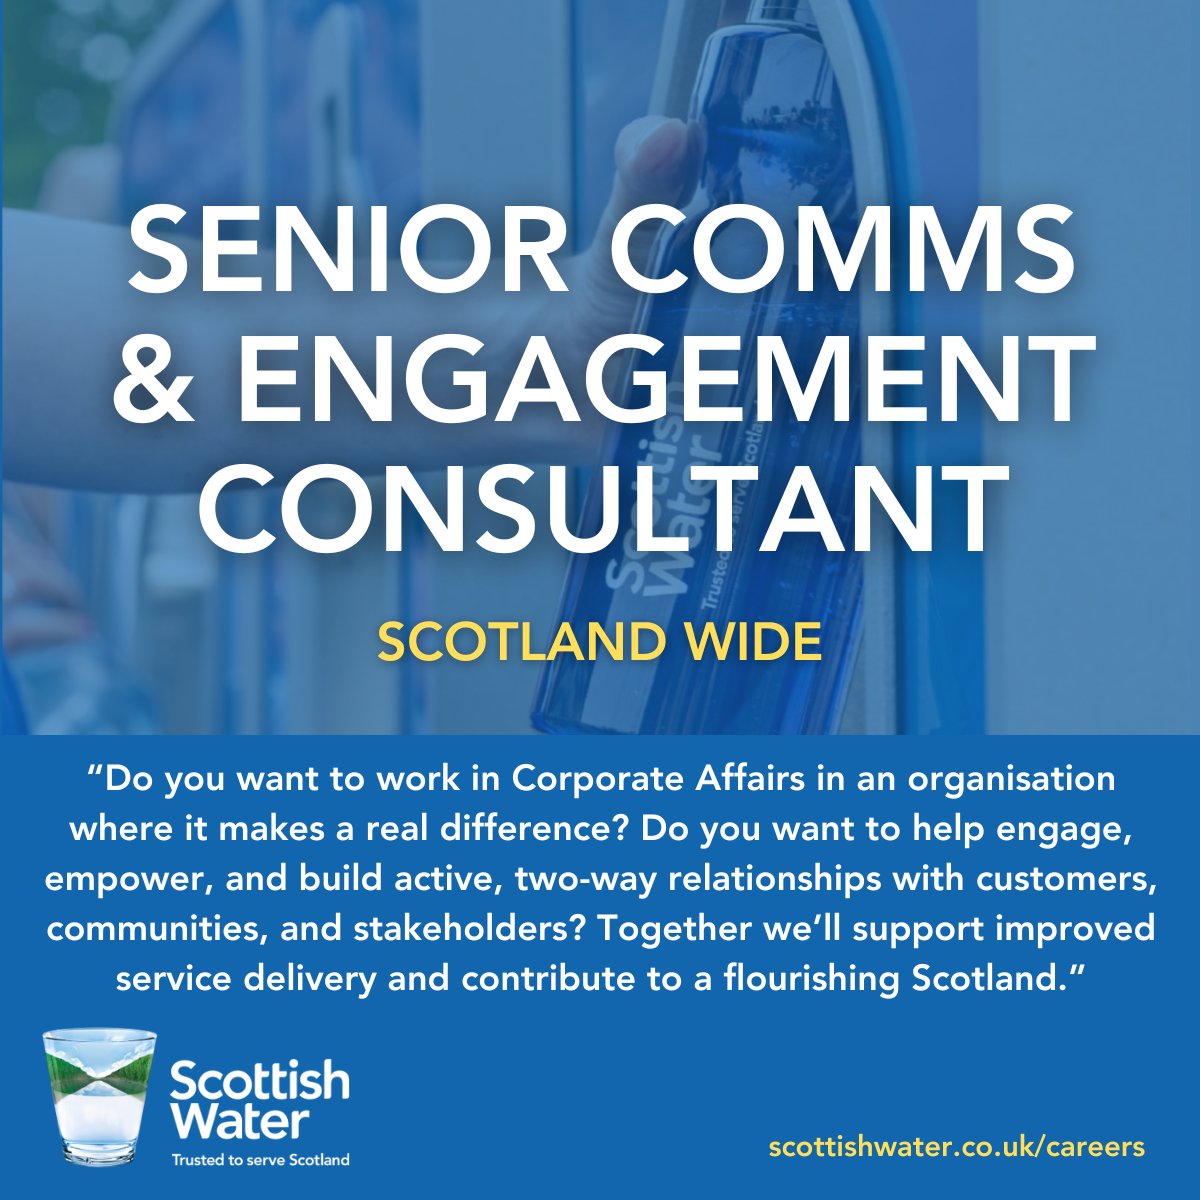 Join us at Scottish Water to provide expert communication and engagement support, fostering trust and safeguarding our reputation. bit.ly/4aCsuYE #CorporateAffairs #PublicRelations